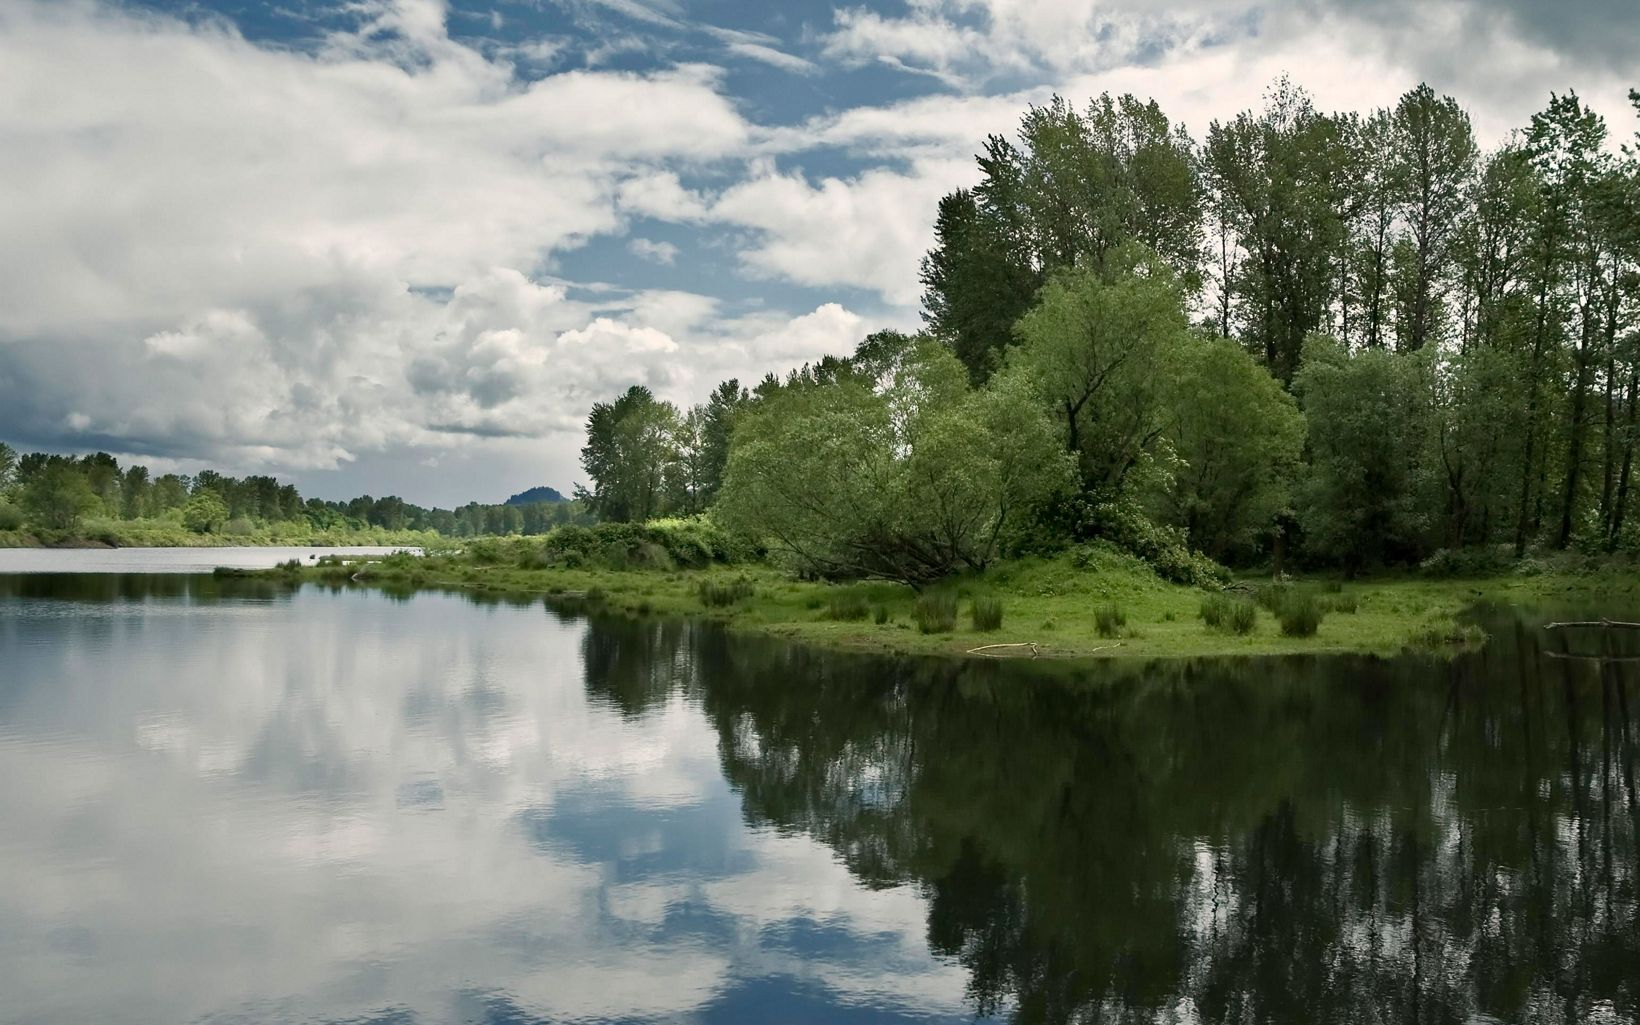 With extensive habitats increasingly endangered in Oregon's Willamette Valley, the Willamette Confluence project includes six miles of river corridor, floodplain forest, wetlands, upland oak woodlands and native prairie.